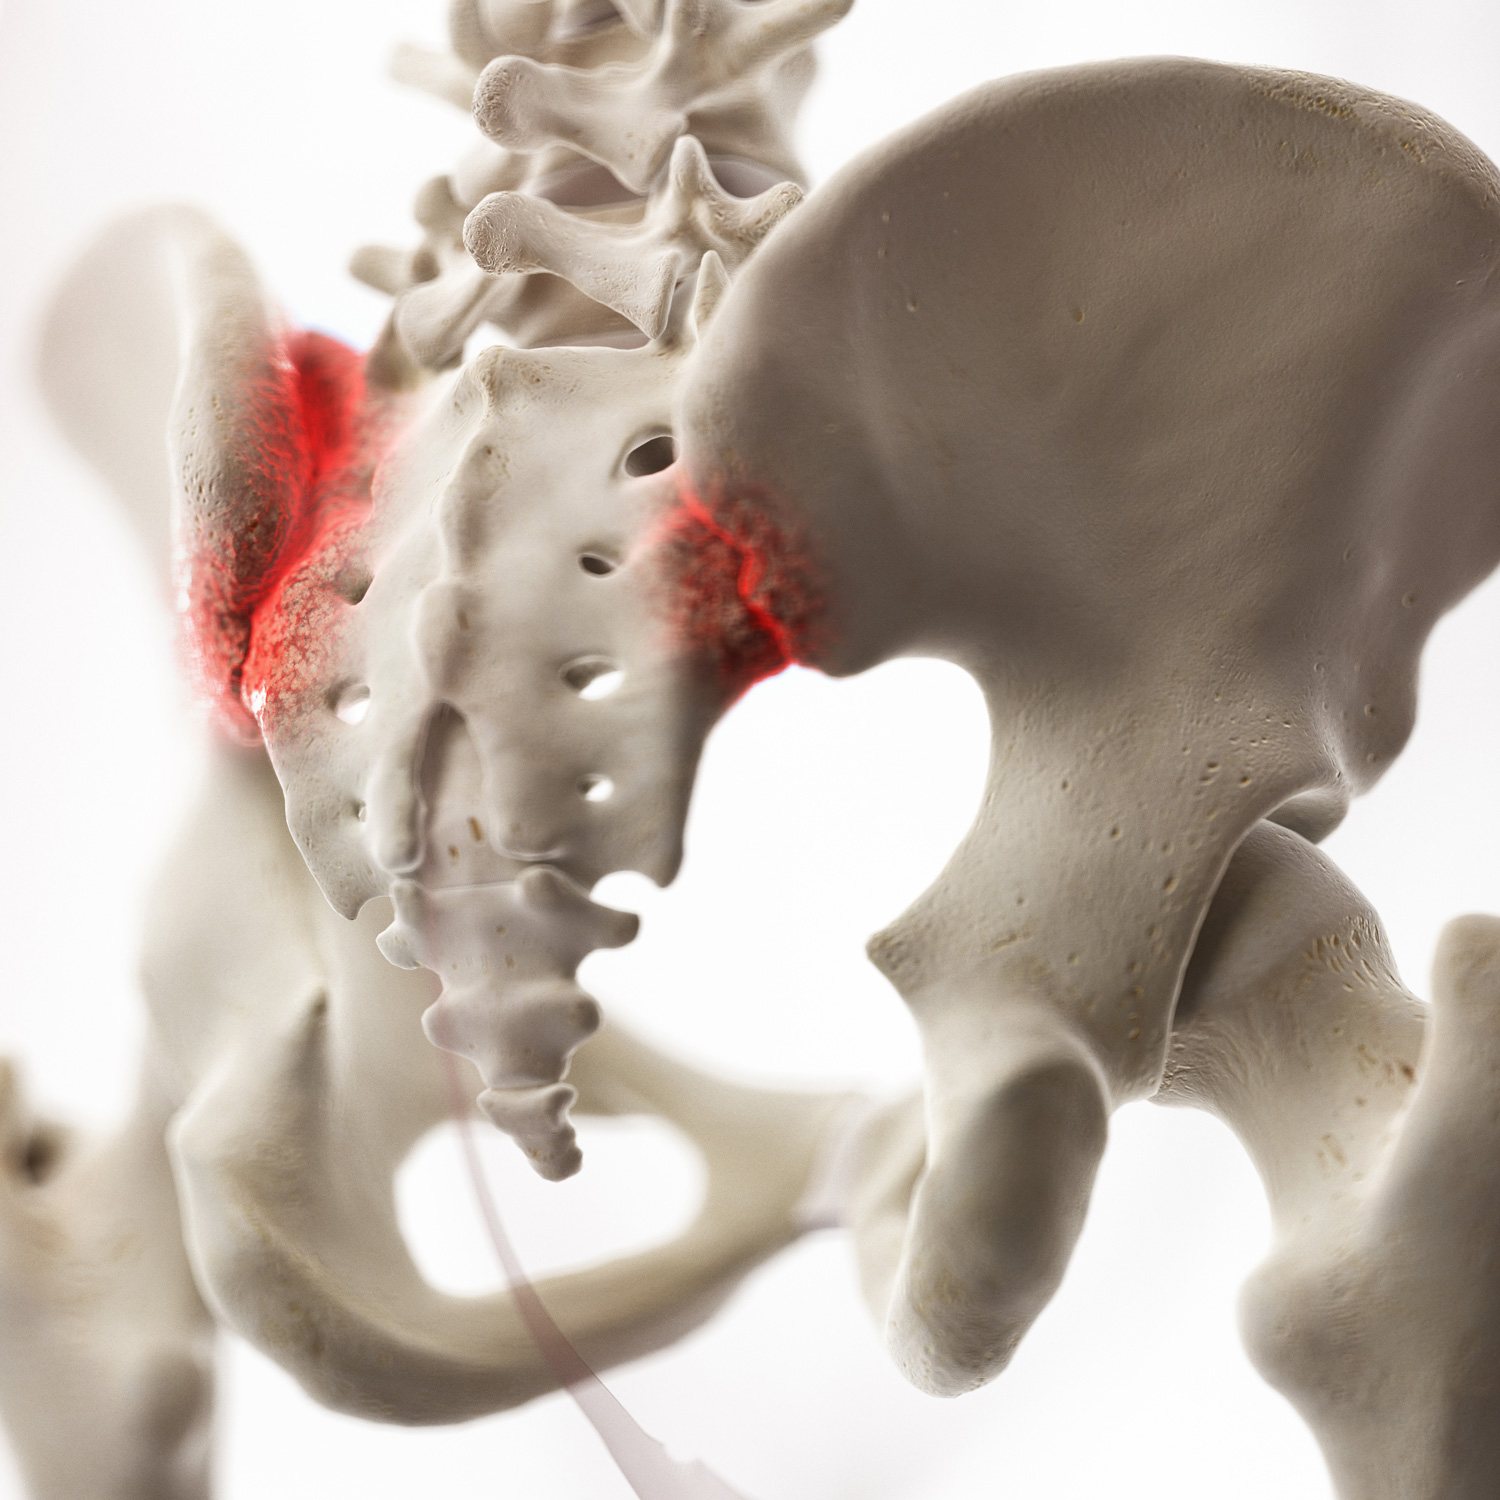 the sacroiliac (SI) joint that connects your spine to your pelvis in pain